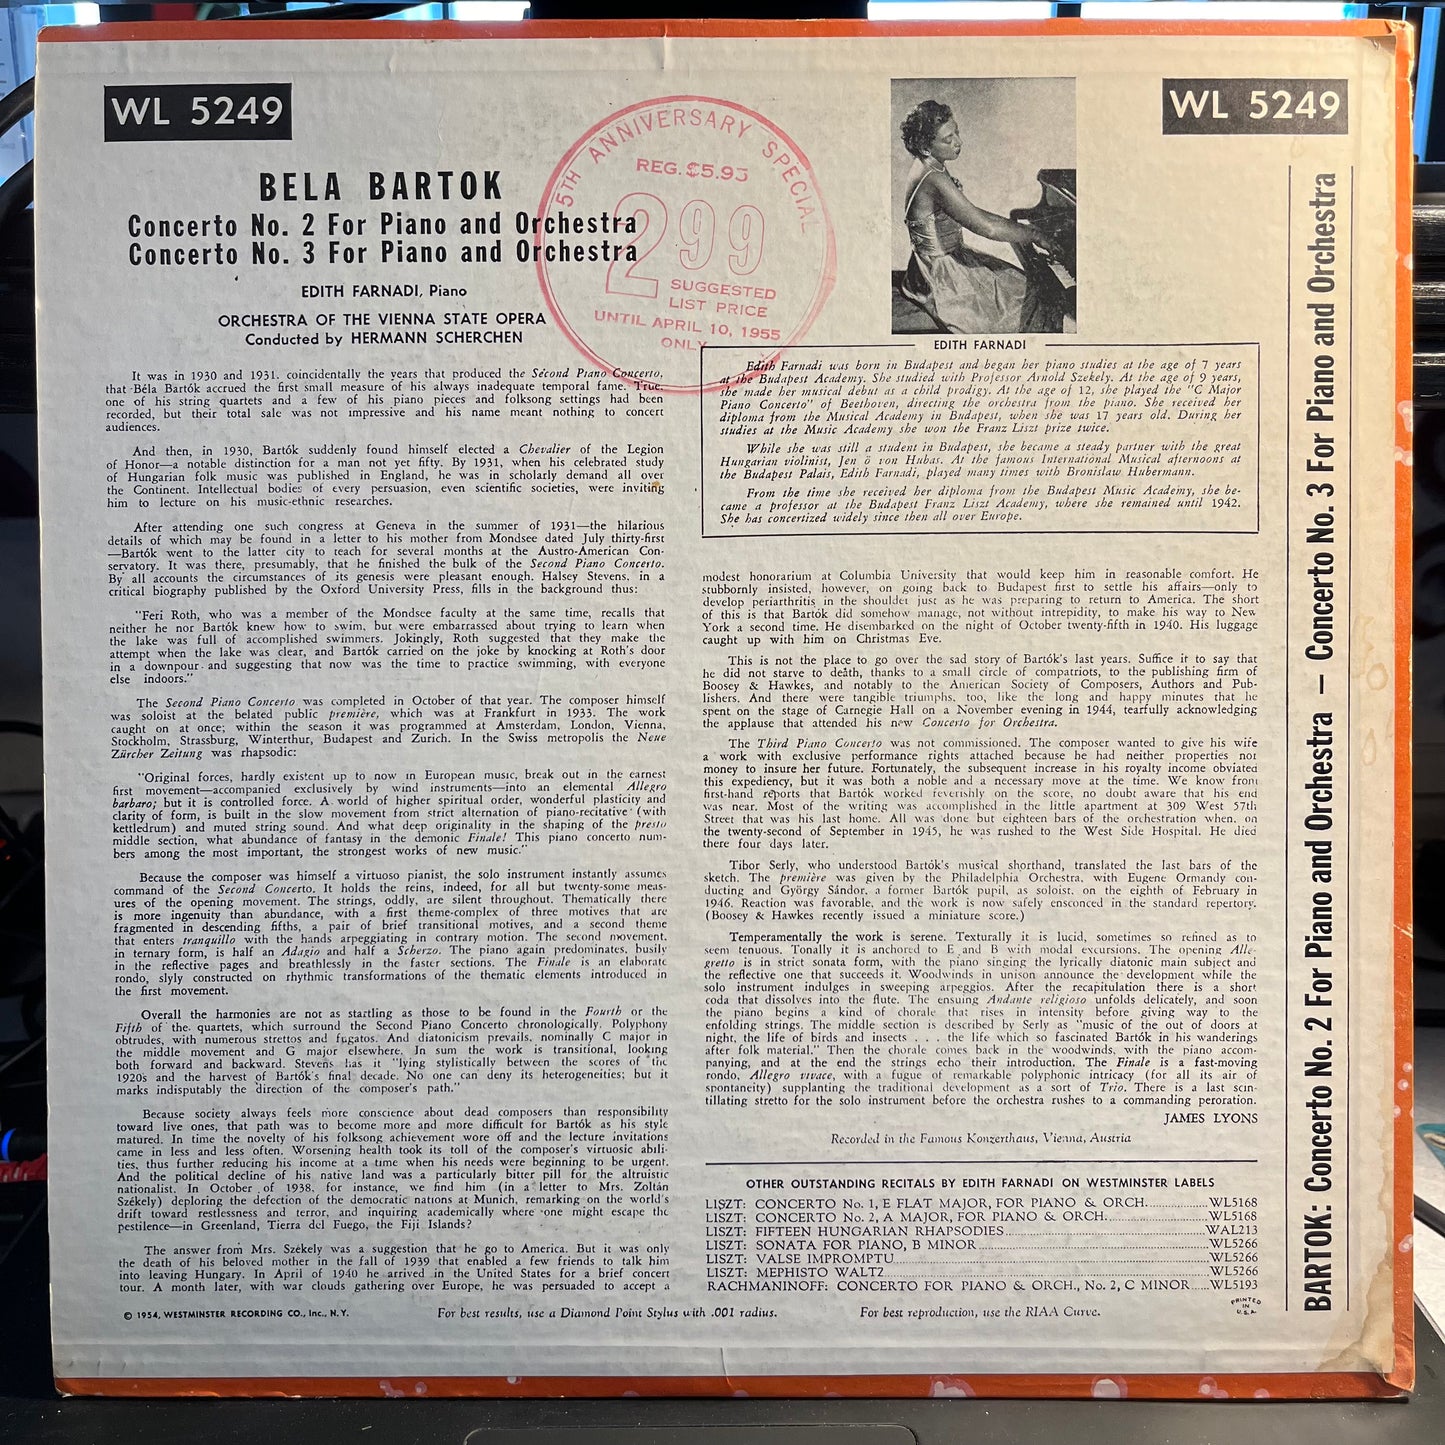 Béla Bartók Concerto No. 2 For Piano And Orchestra / Concerto No. 3 For Piano And Orchestra LP Near Mint (NM or M-) Near Mint (NM or M-)